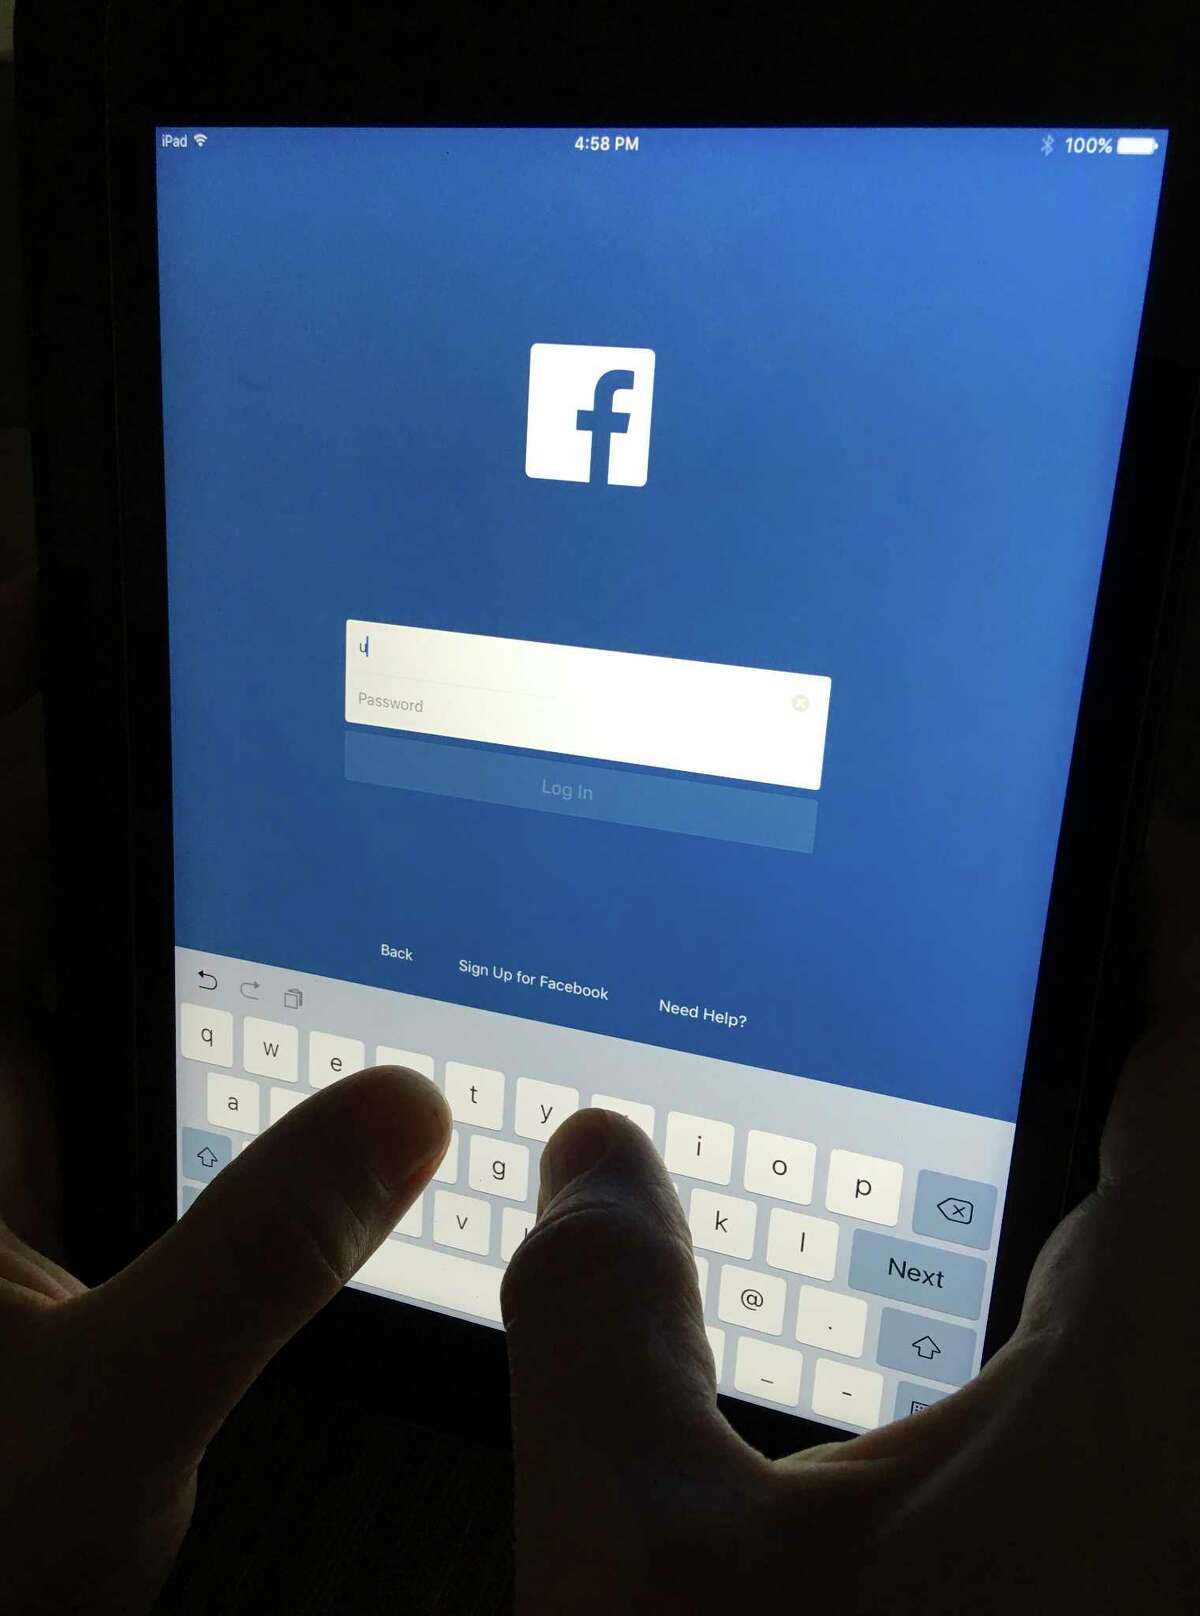 In this Monday, June 19, 2017, photo, a user signs into Facebook on an iPad, in North Andover, Mass. Facebook has squeezed just about as many ads into its main platform as it can. Any more and users might start to complain. Now, ads are moving on to Messenger, and WhatsApp may not be too far behind. (AP Photo/Elise Amendola)